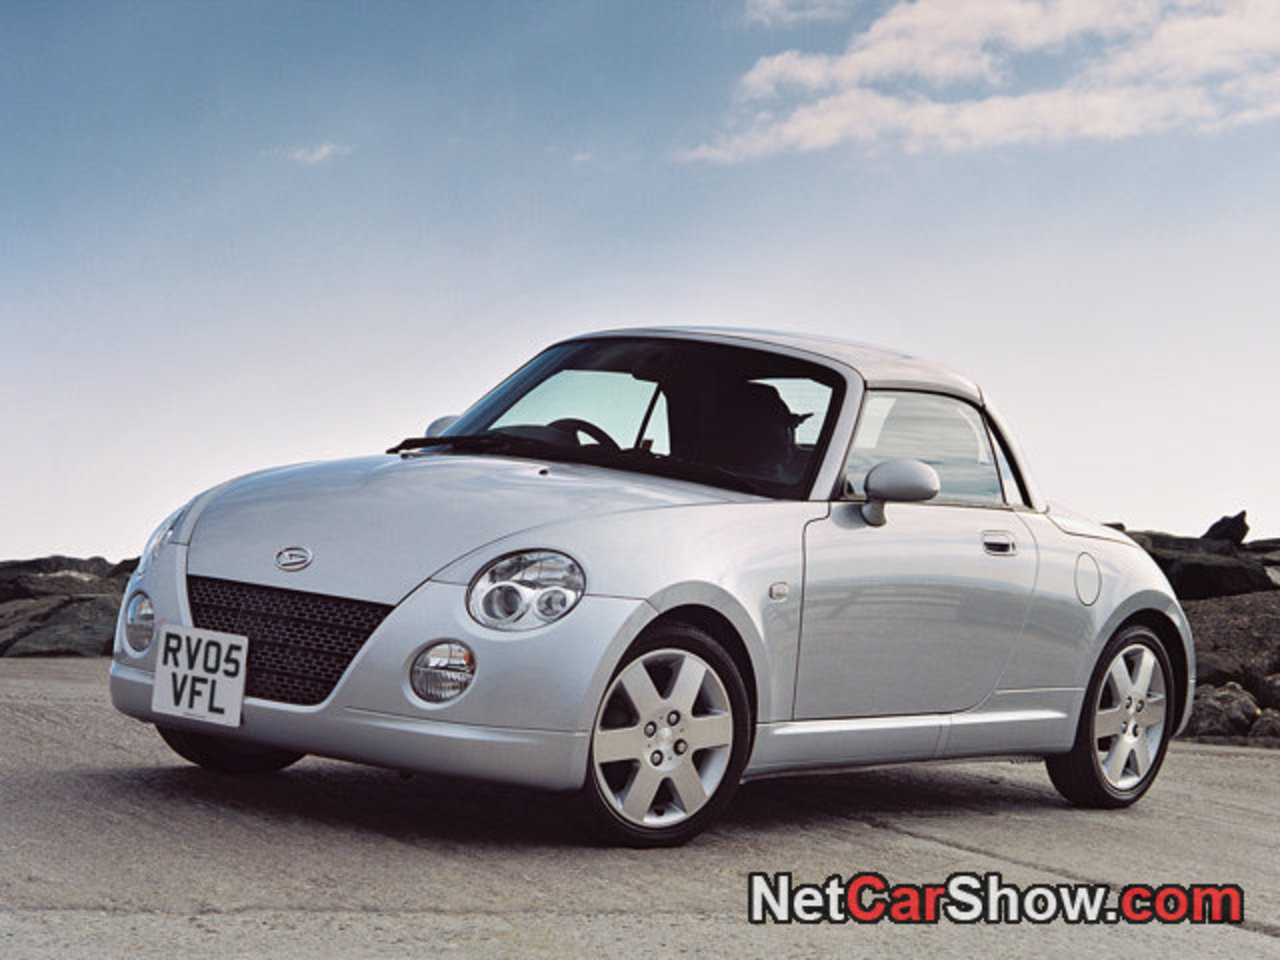 Daihatsu Copen picture # 02 of 17, Front Angle, MY 2007, 800x600